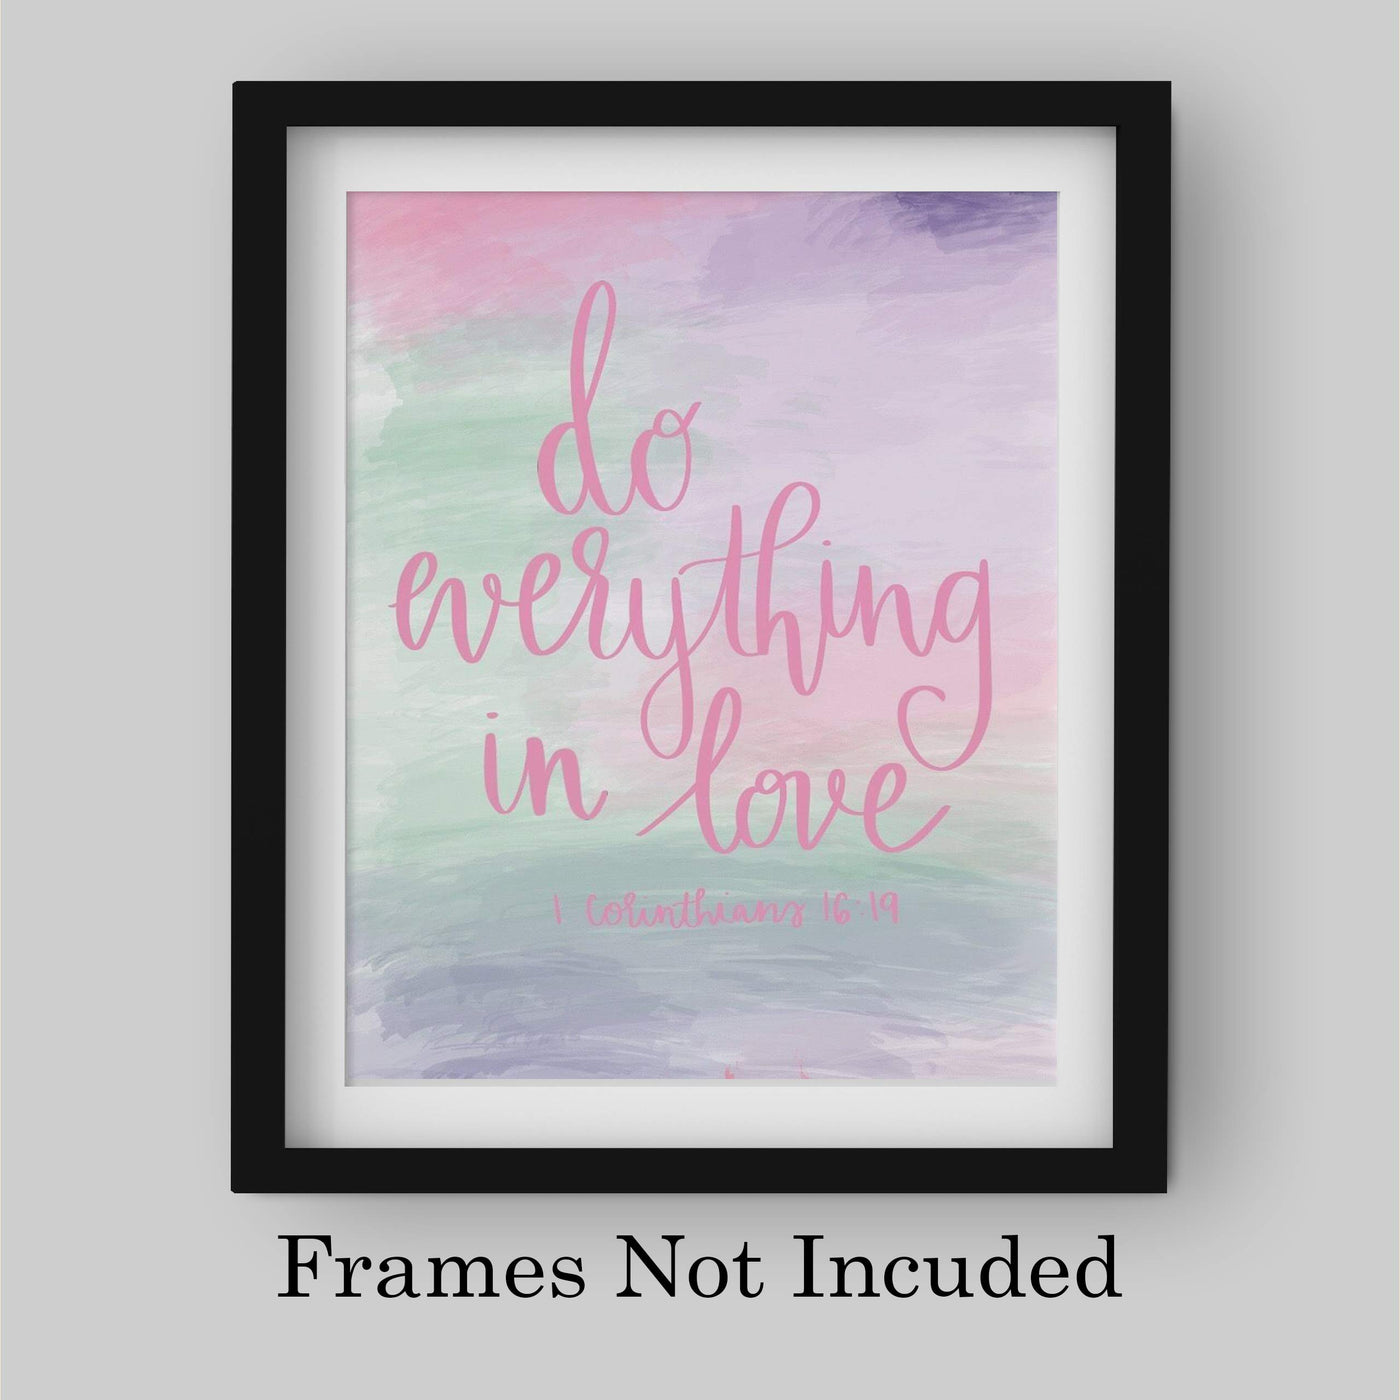 ?Do Everything in Love?- 1 Corinthians 16:19- Bible Verse Wall Art- 8x10" Modern Abstract Watercolor Design. Scripture Wall Print-Ready to Frame. Home-Office-Church D?cor. Great Christian Gift!